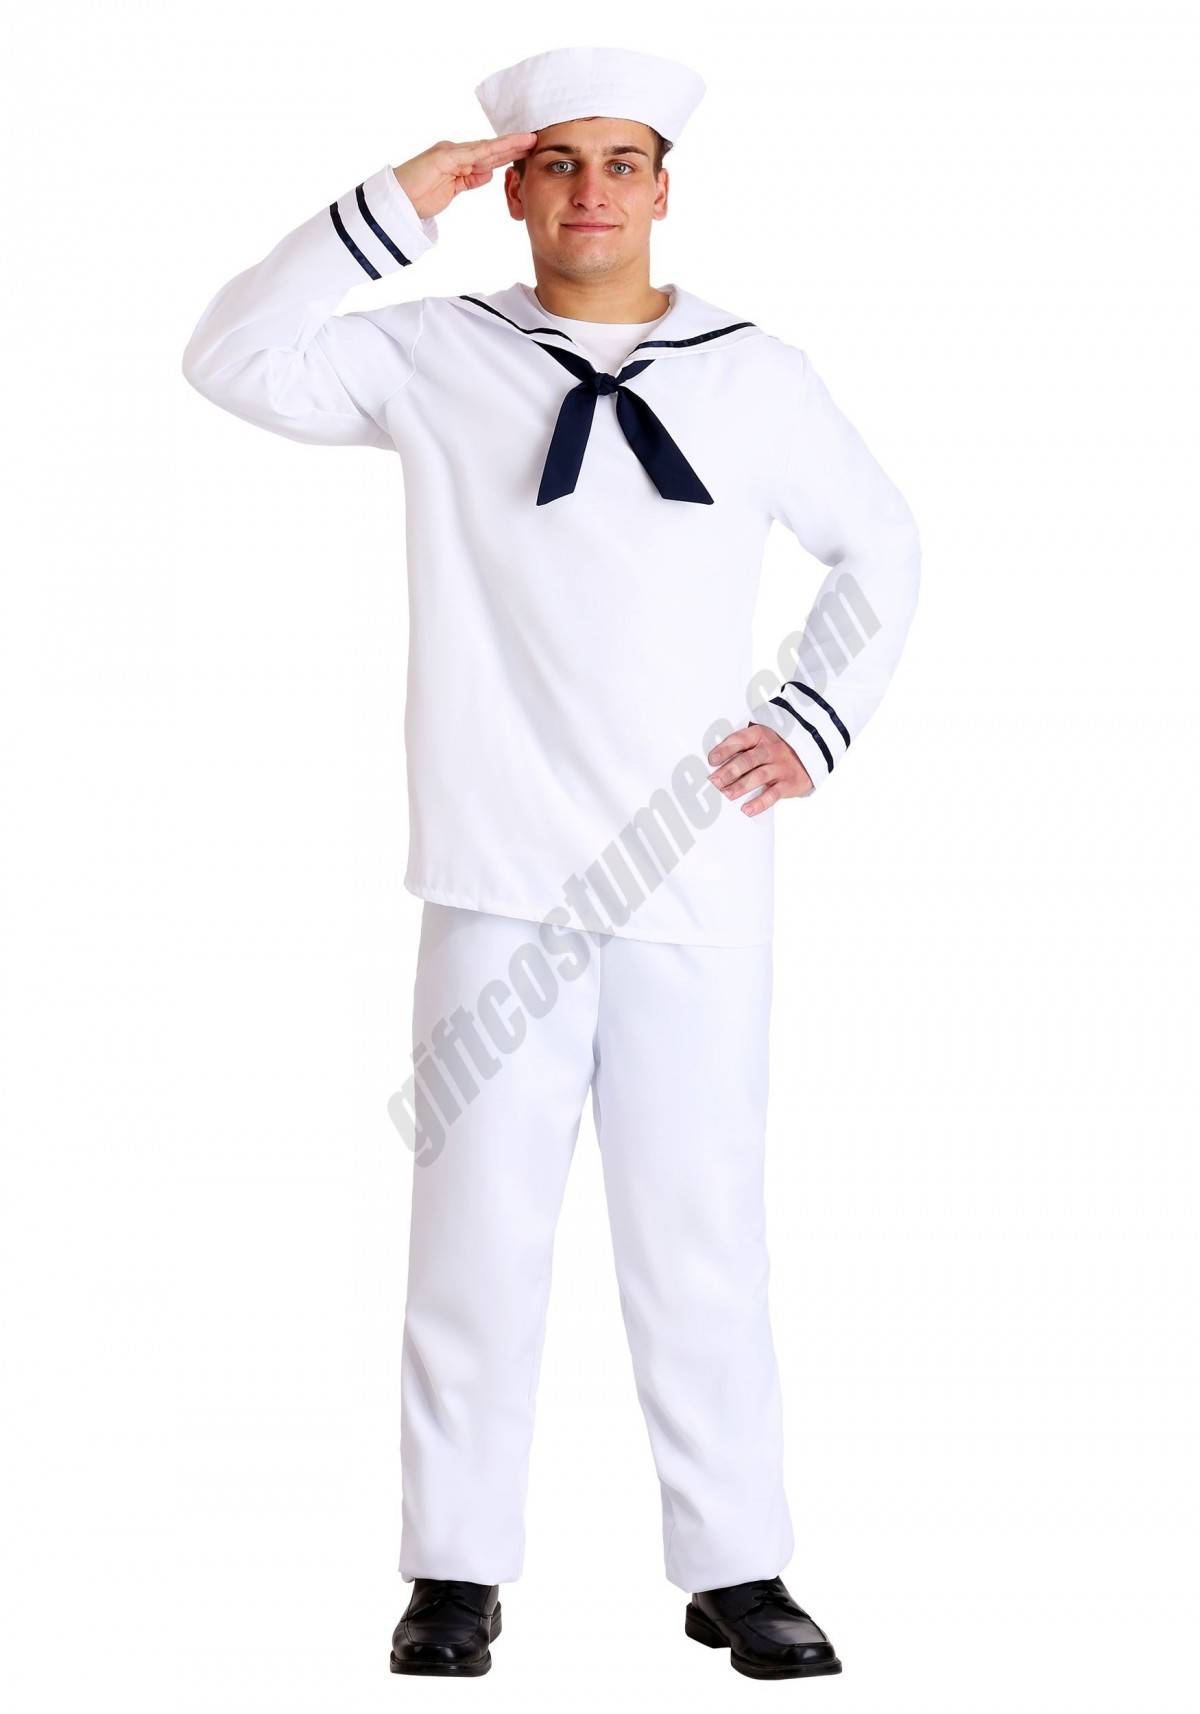 Teen Sailor Costume Promotions - -0